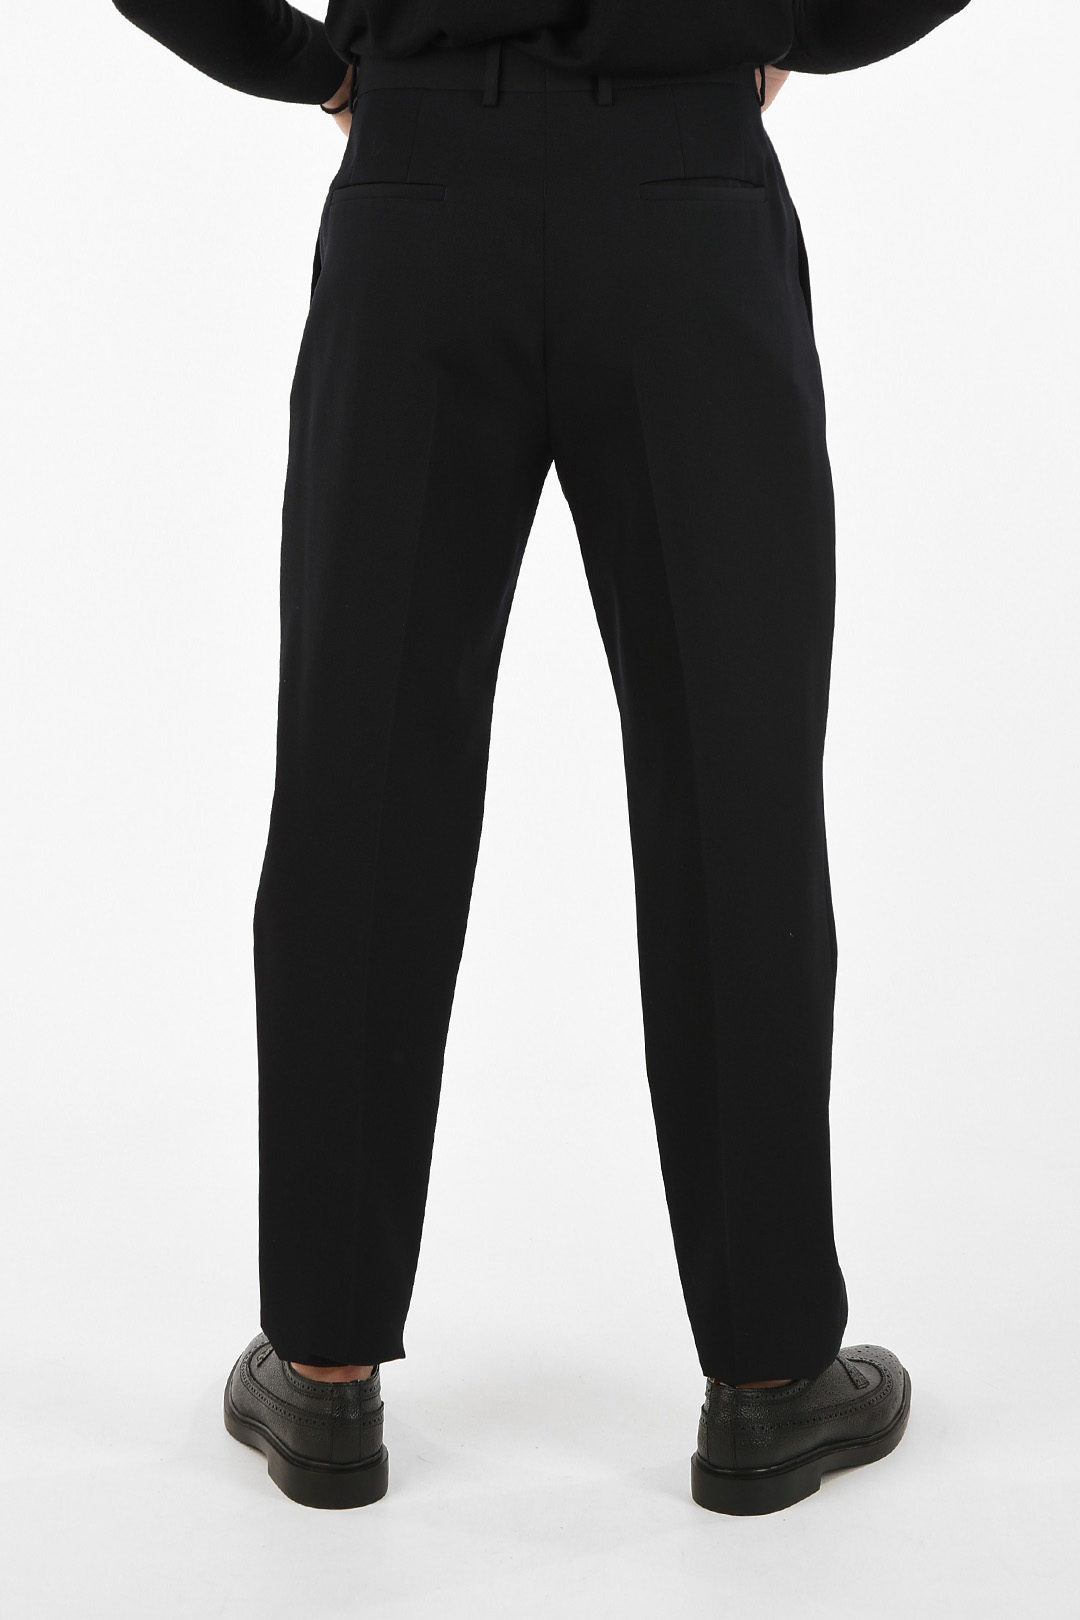 Mens single pleat trousers  WISE Worksafe